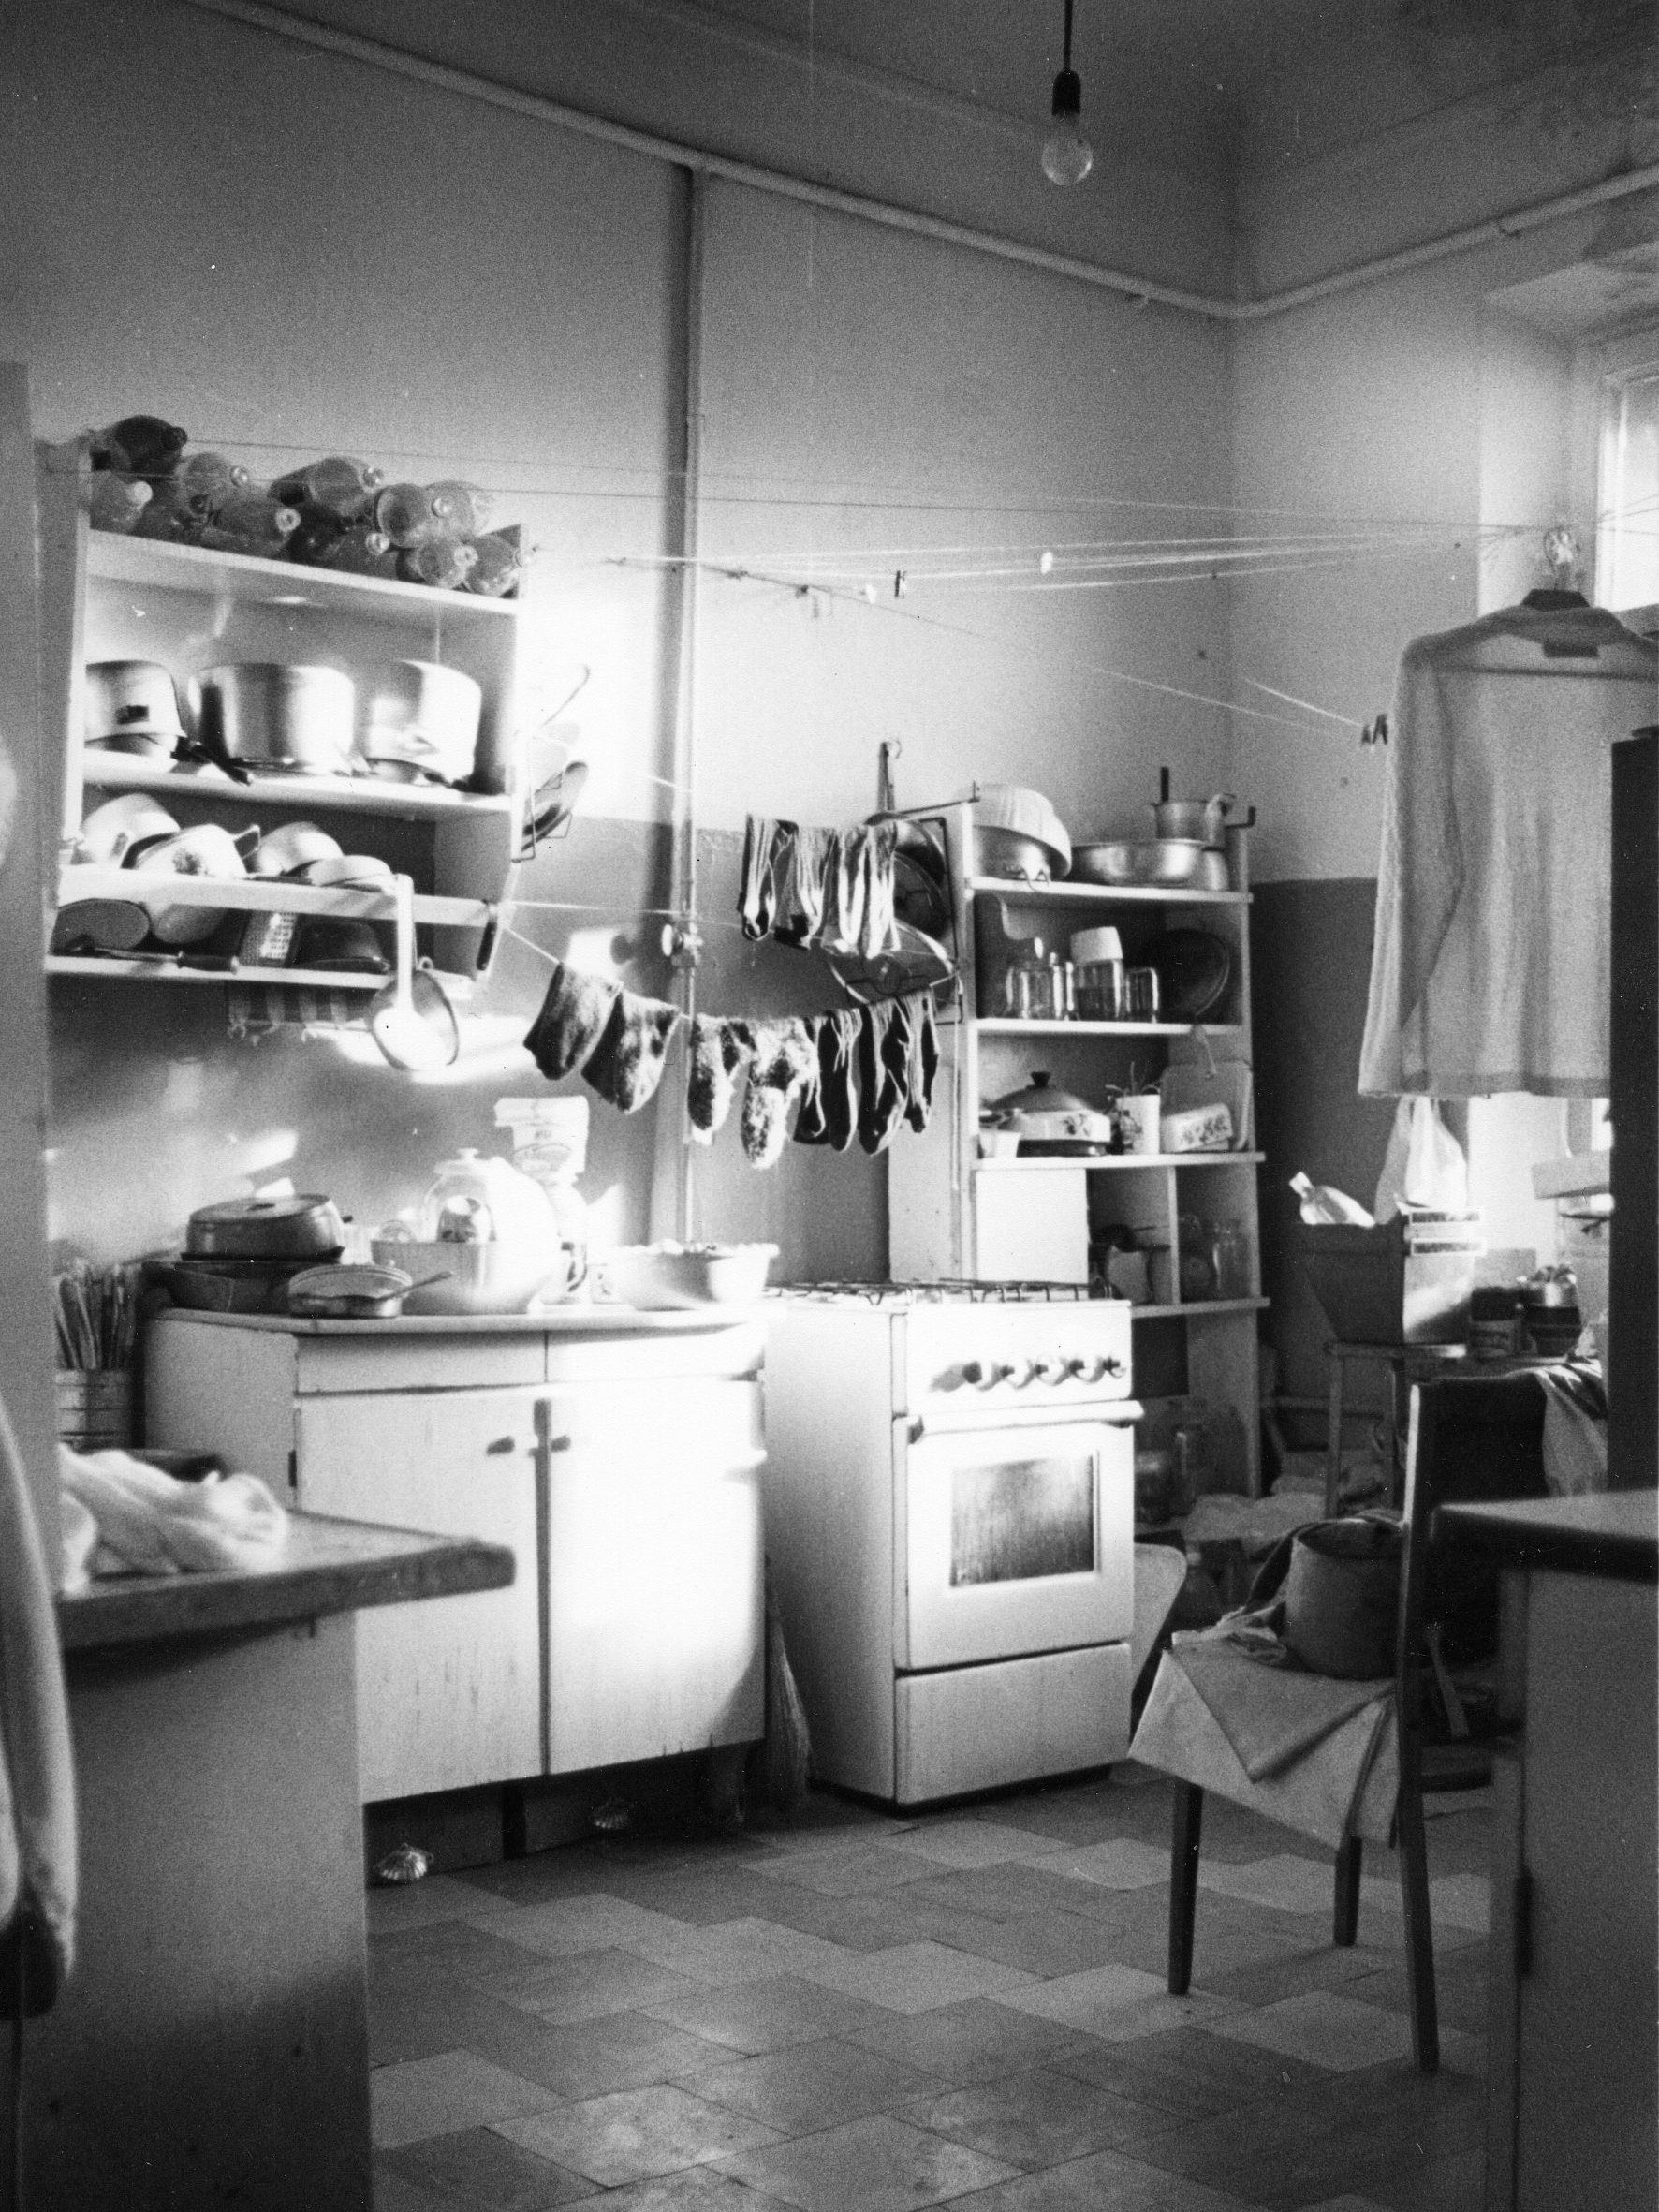 Laundry drying in a communal kitchen in Moscow. Photo: Courtesy of European University, St. Petersburg, Russia, Colgate University and Cornell University